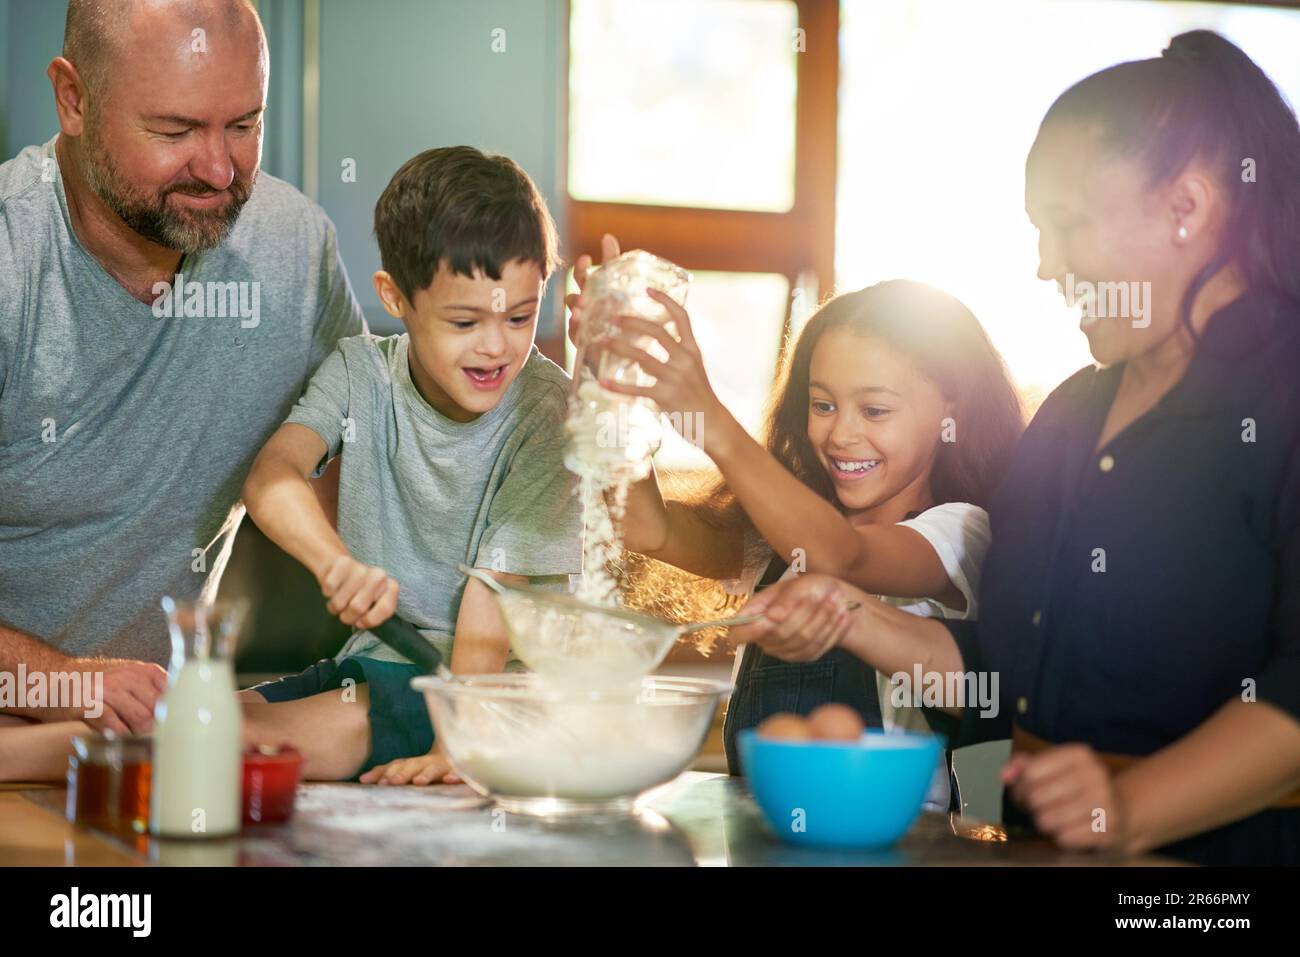 Happy family baking together in kitchen at home Stock Photo